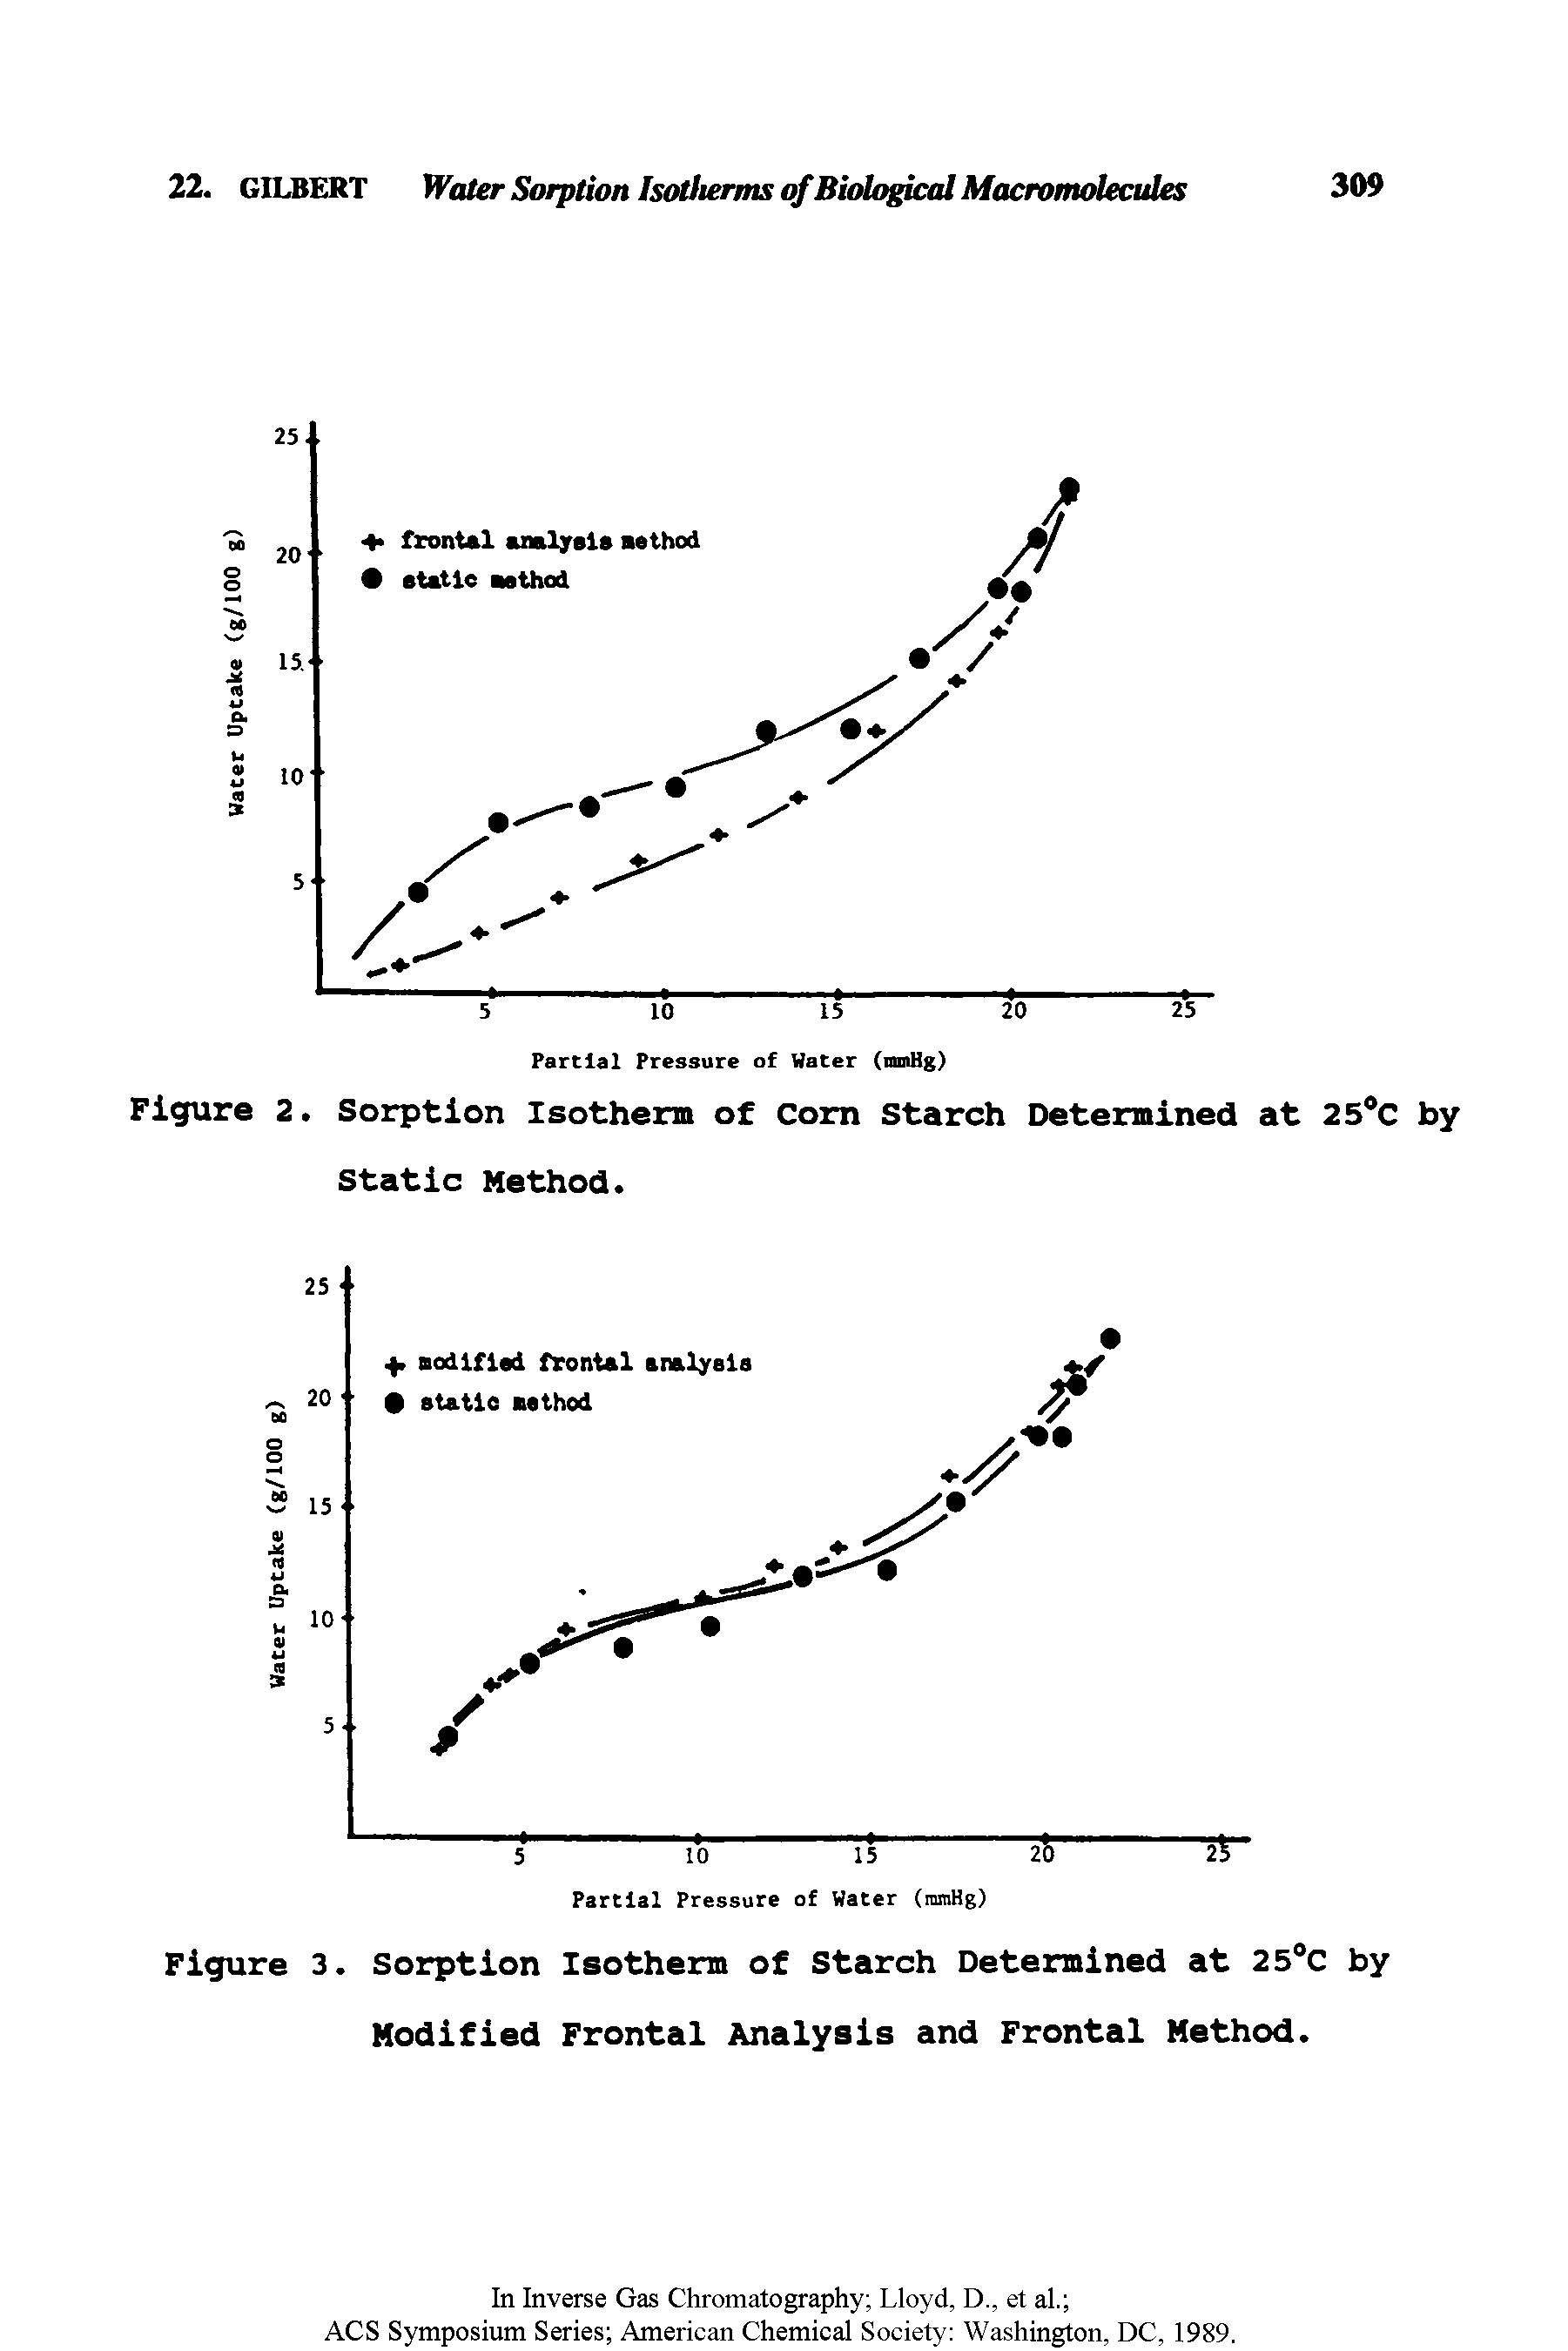 Figure 3. Sorption Isotherm of Starch Determined at 25°C by Modified Frontal Analysis and Frontal Method.